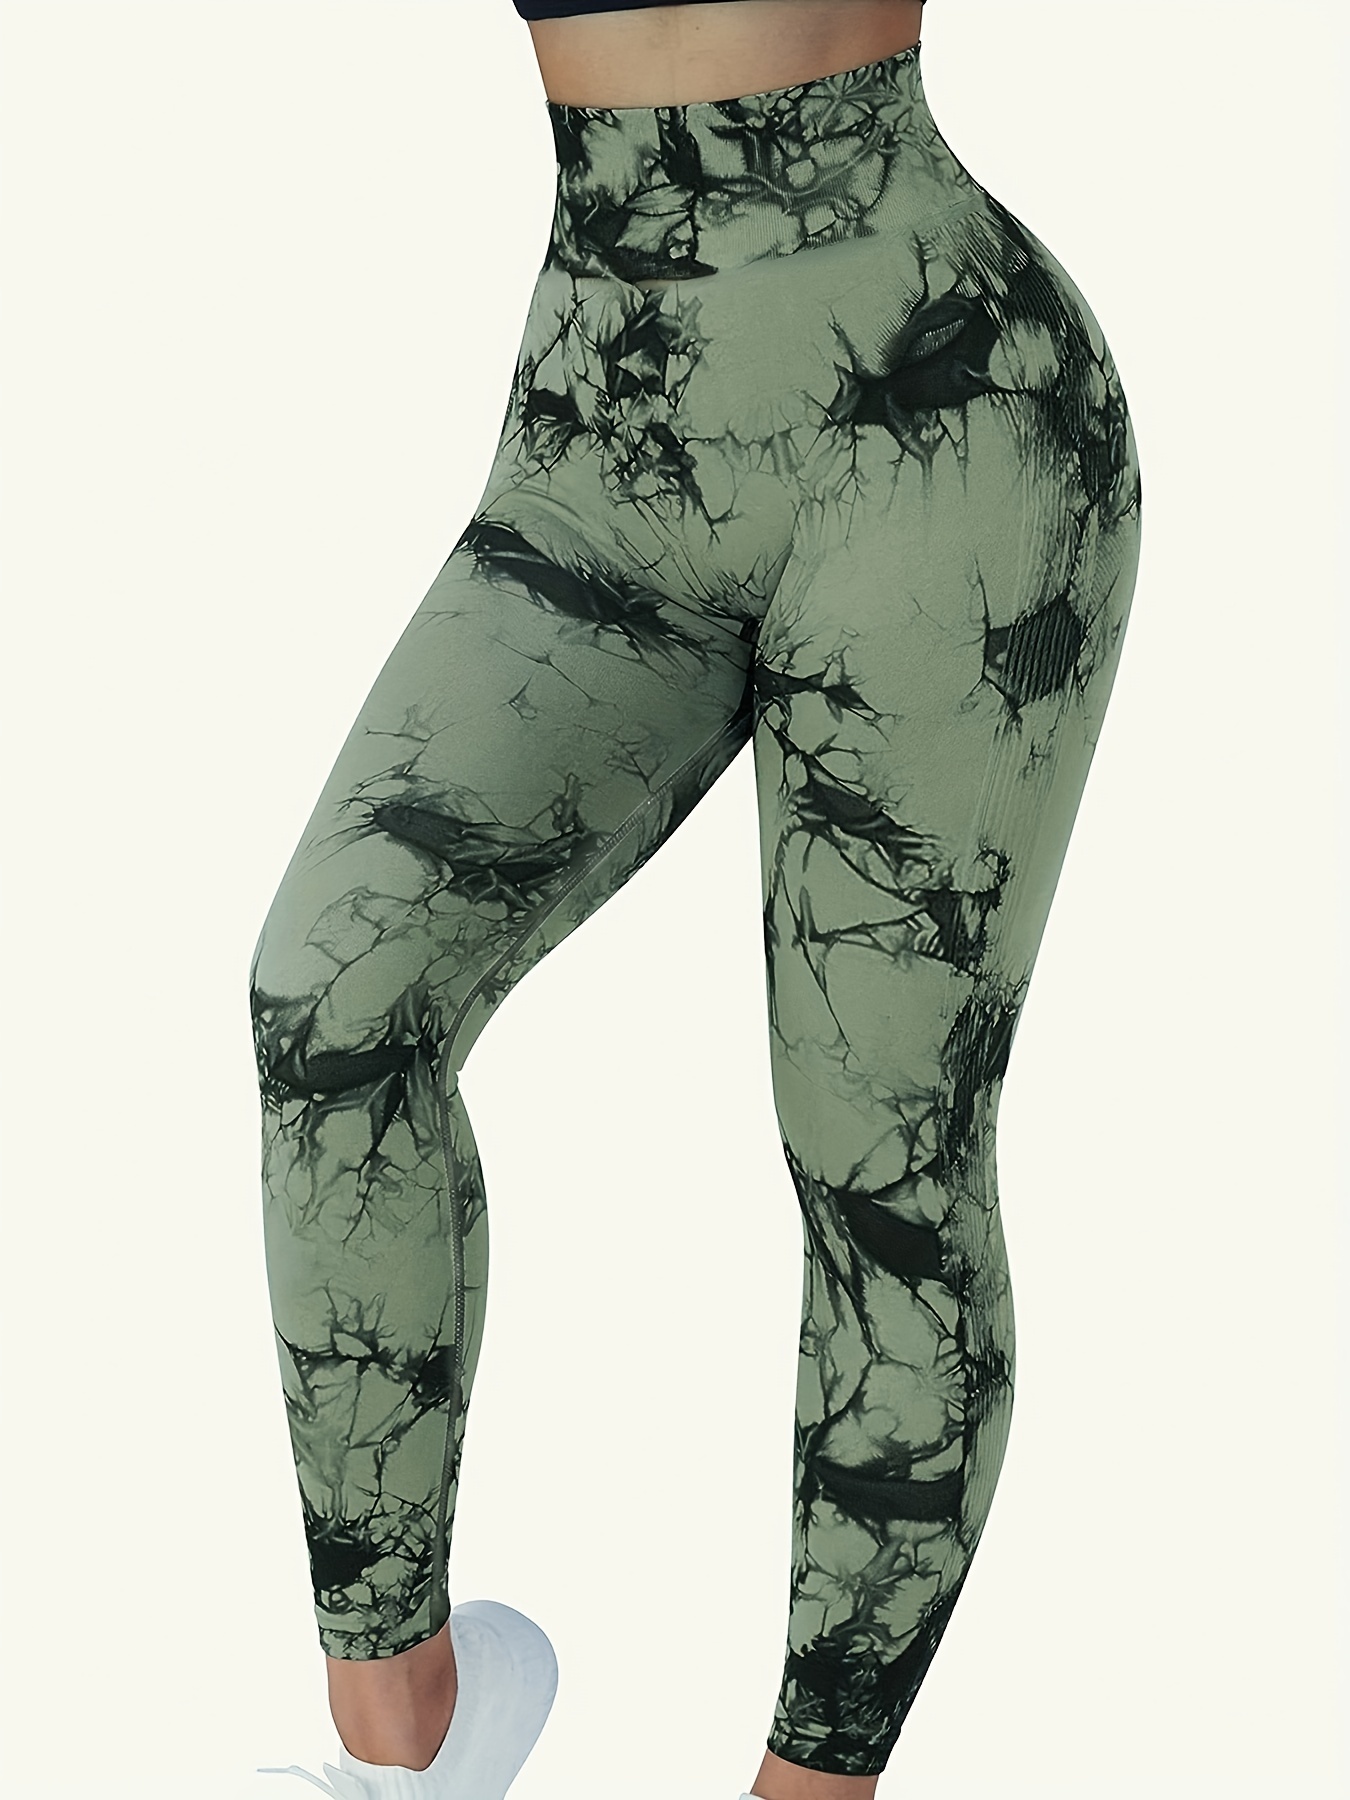 Women's Active Tie-Dye Workout Leggings. (3 PACK)* (XL ONLY